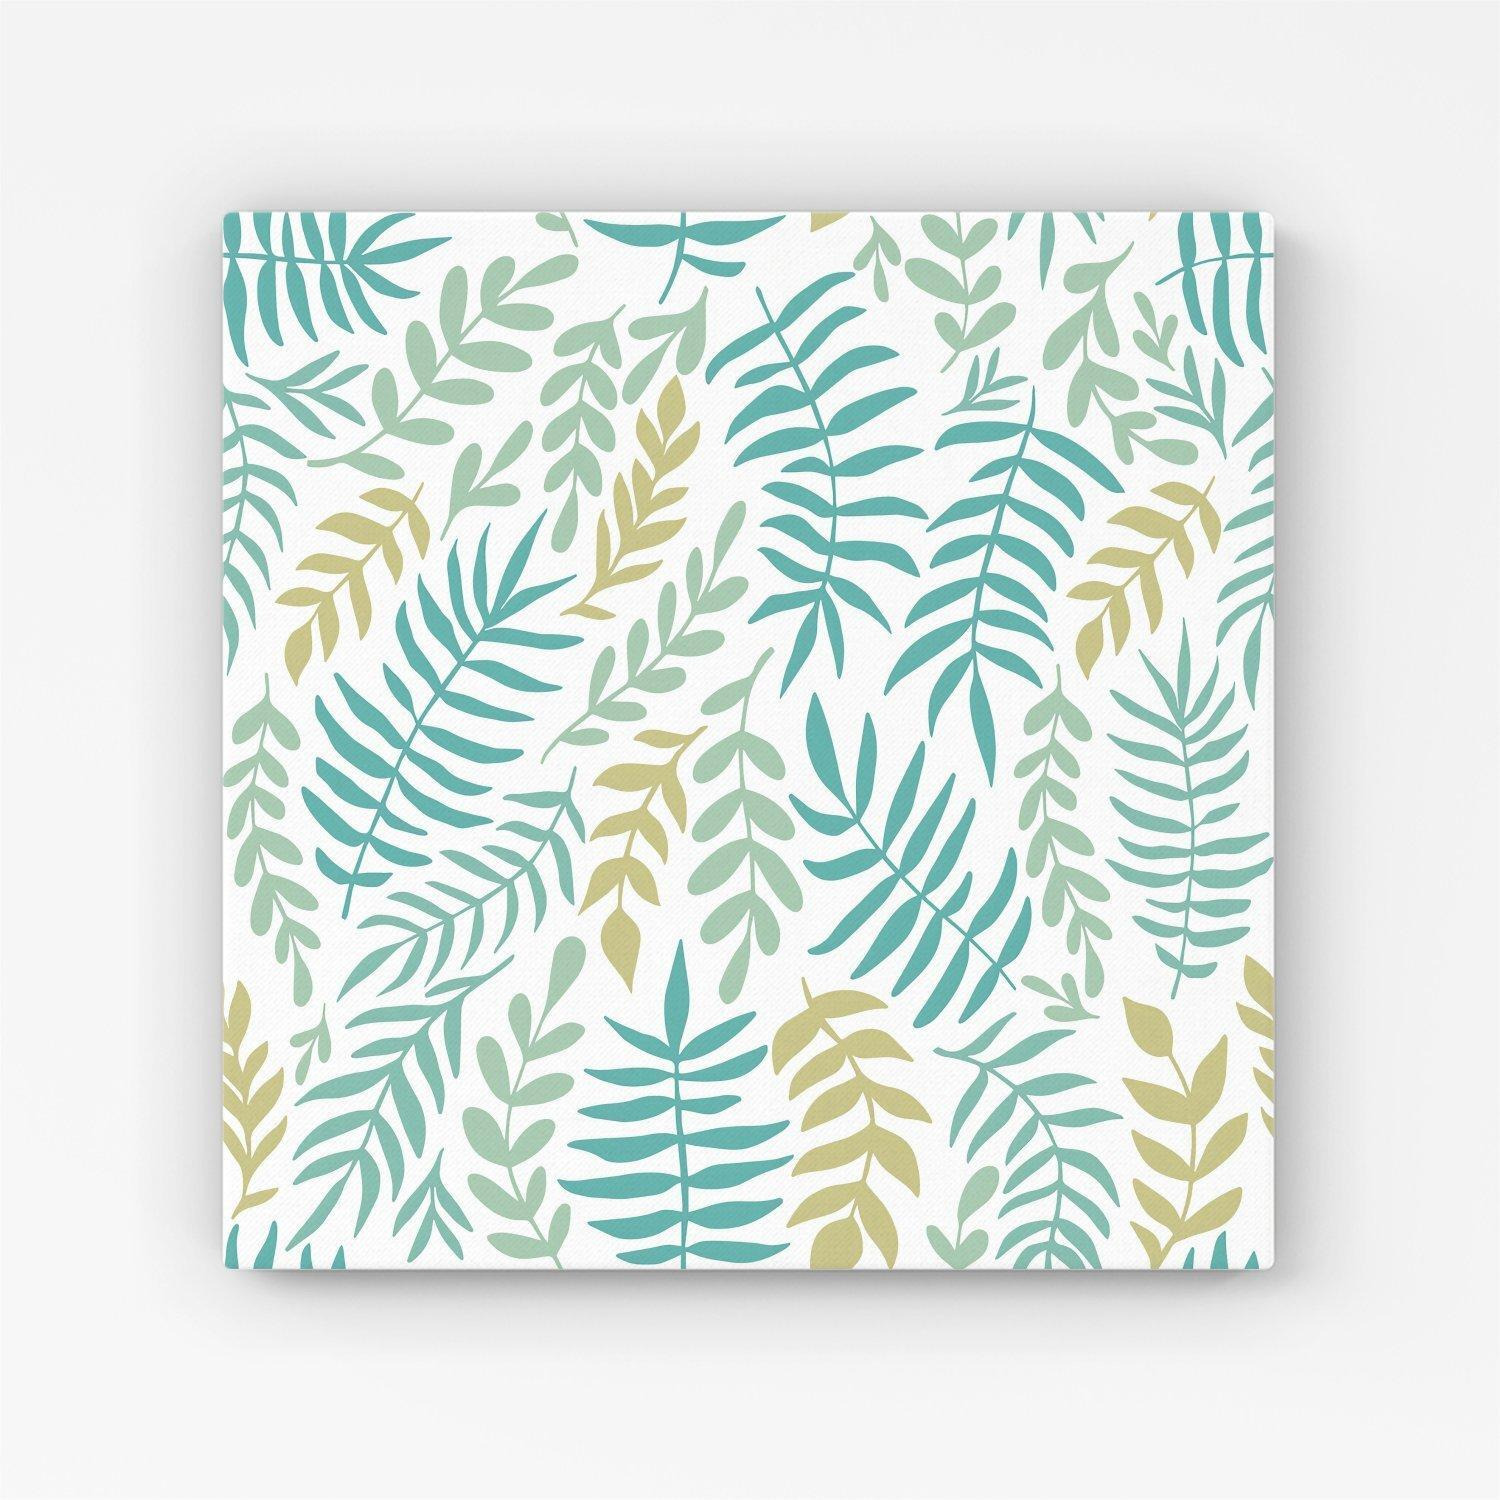 Multicolor Leafs And Branches Canvas - image 1